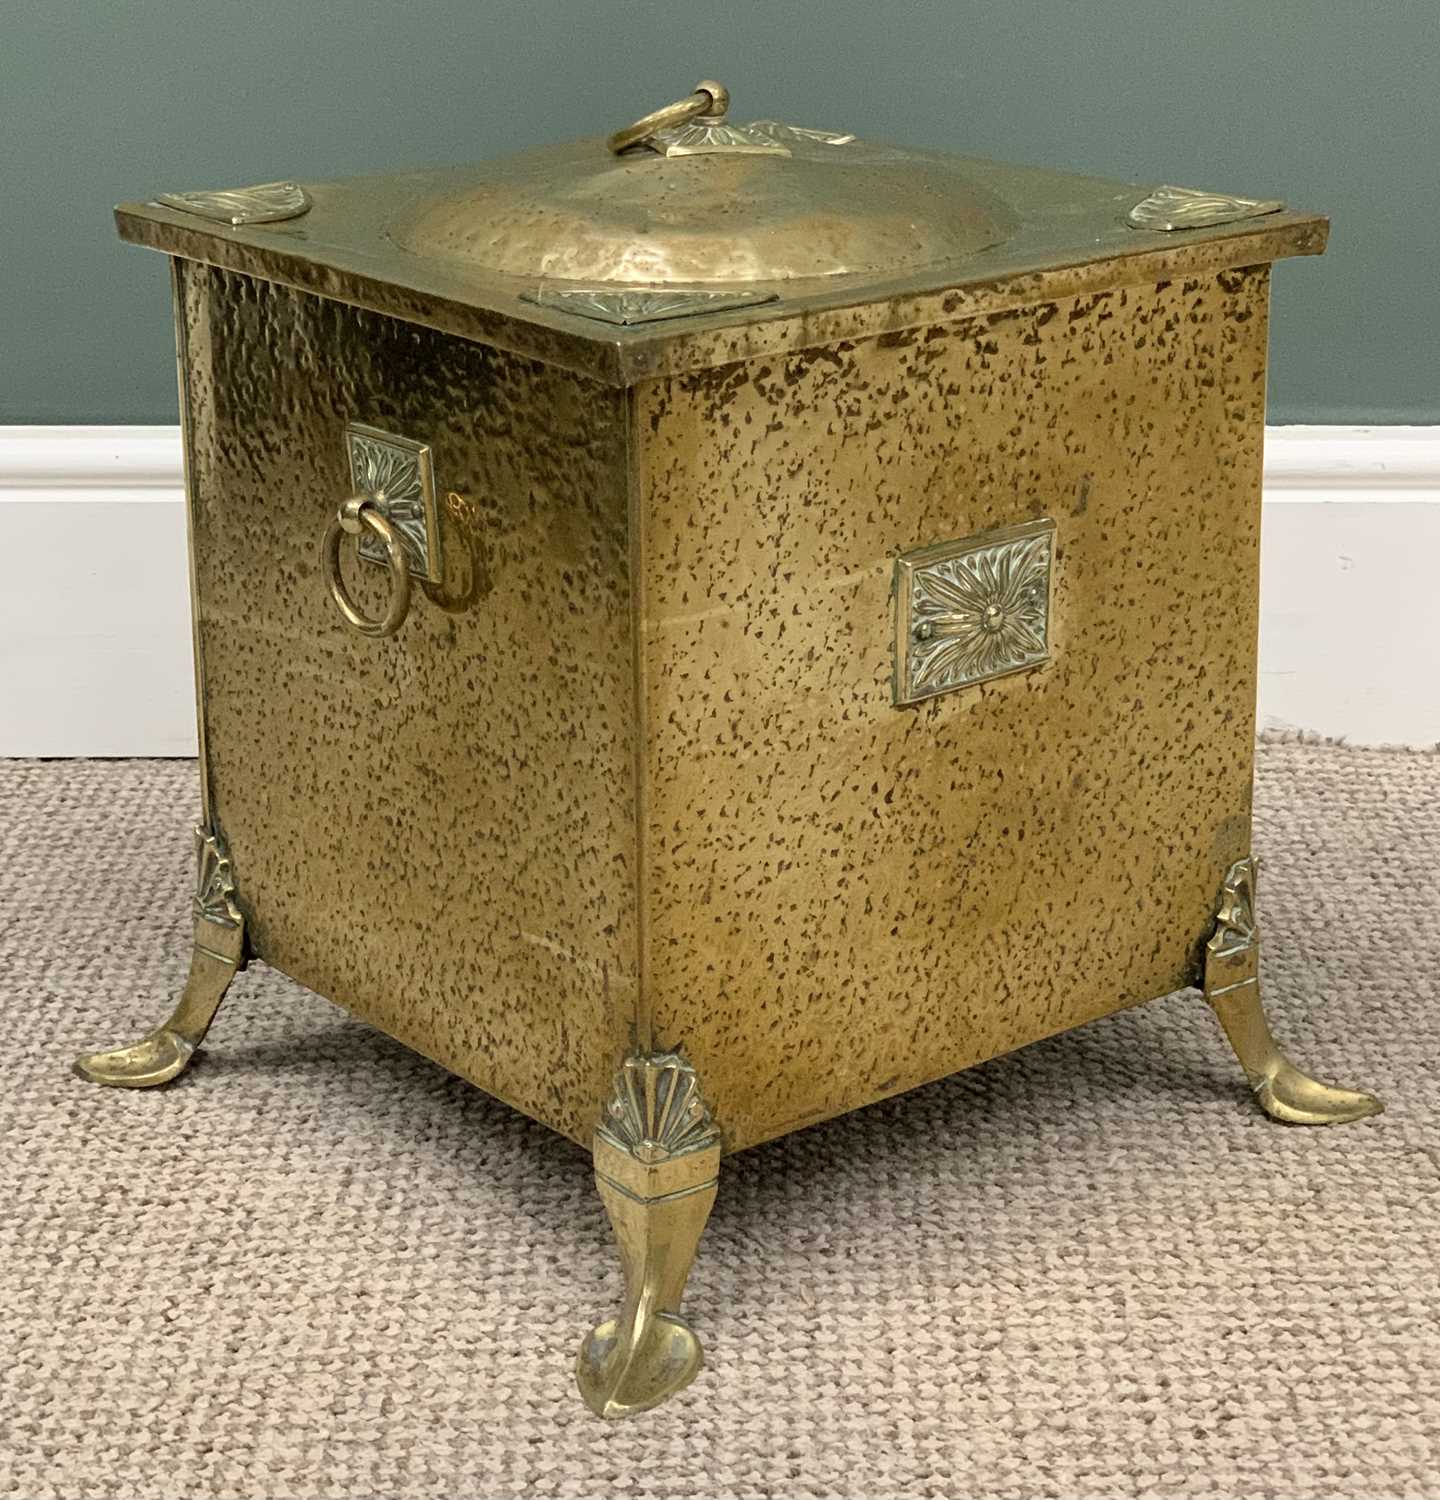 ARTS & CRAFTS STYLE LIDDED BRASS COAL BOX, ring lid lift and carry handles, Egyptian fan type - Image 3 of 4